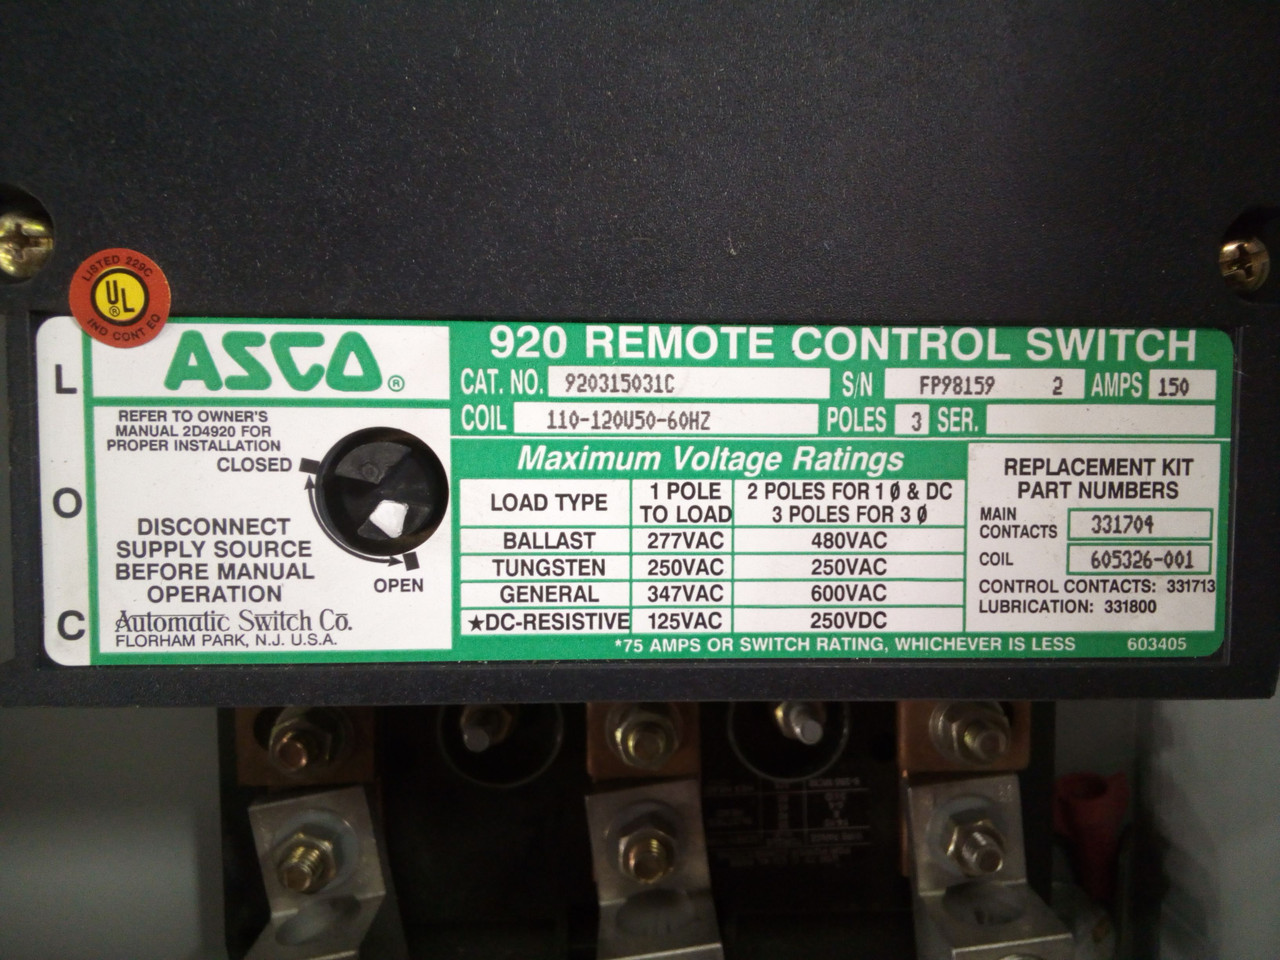 ASCO 920 Remote control Switch 3 Pole / 150 AMP mounted in Steel  Junction Box  P02-001164